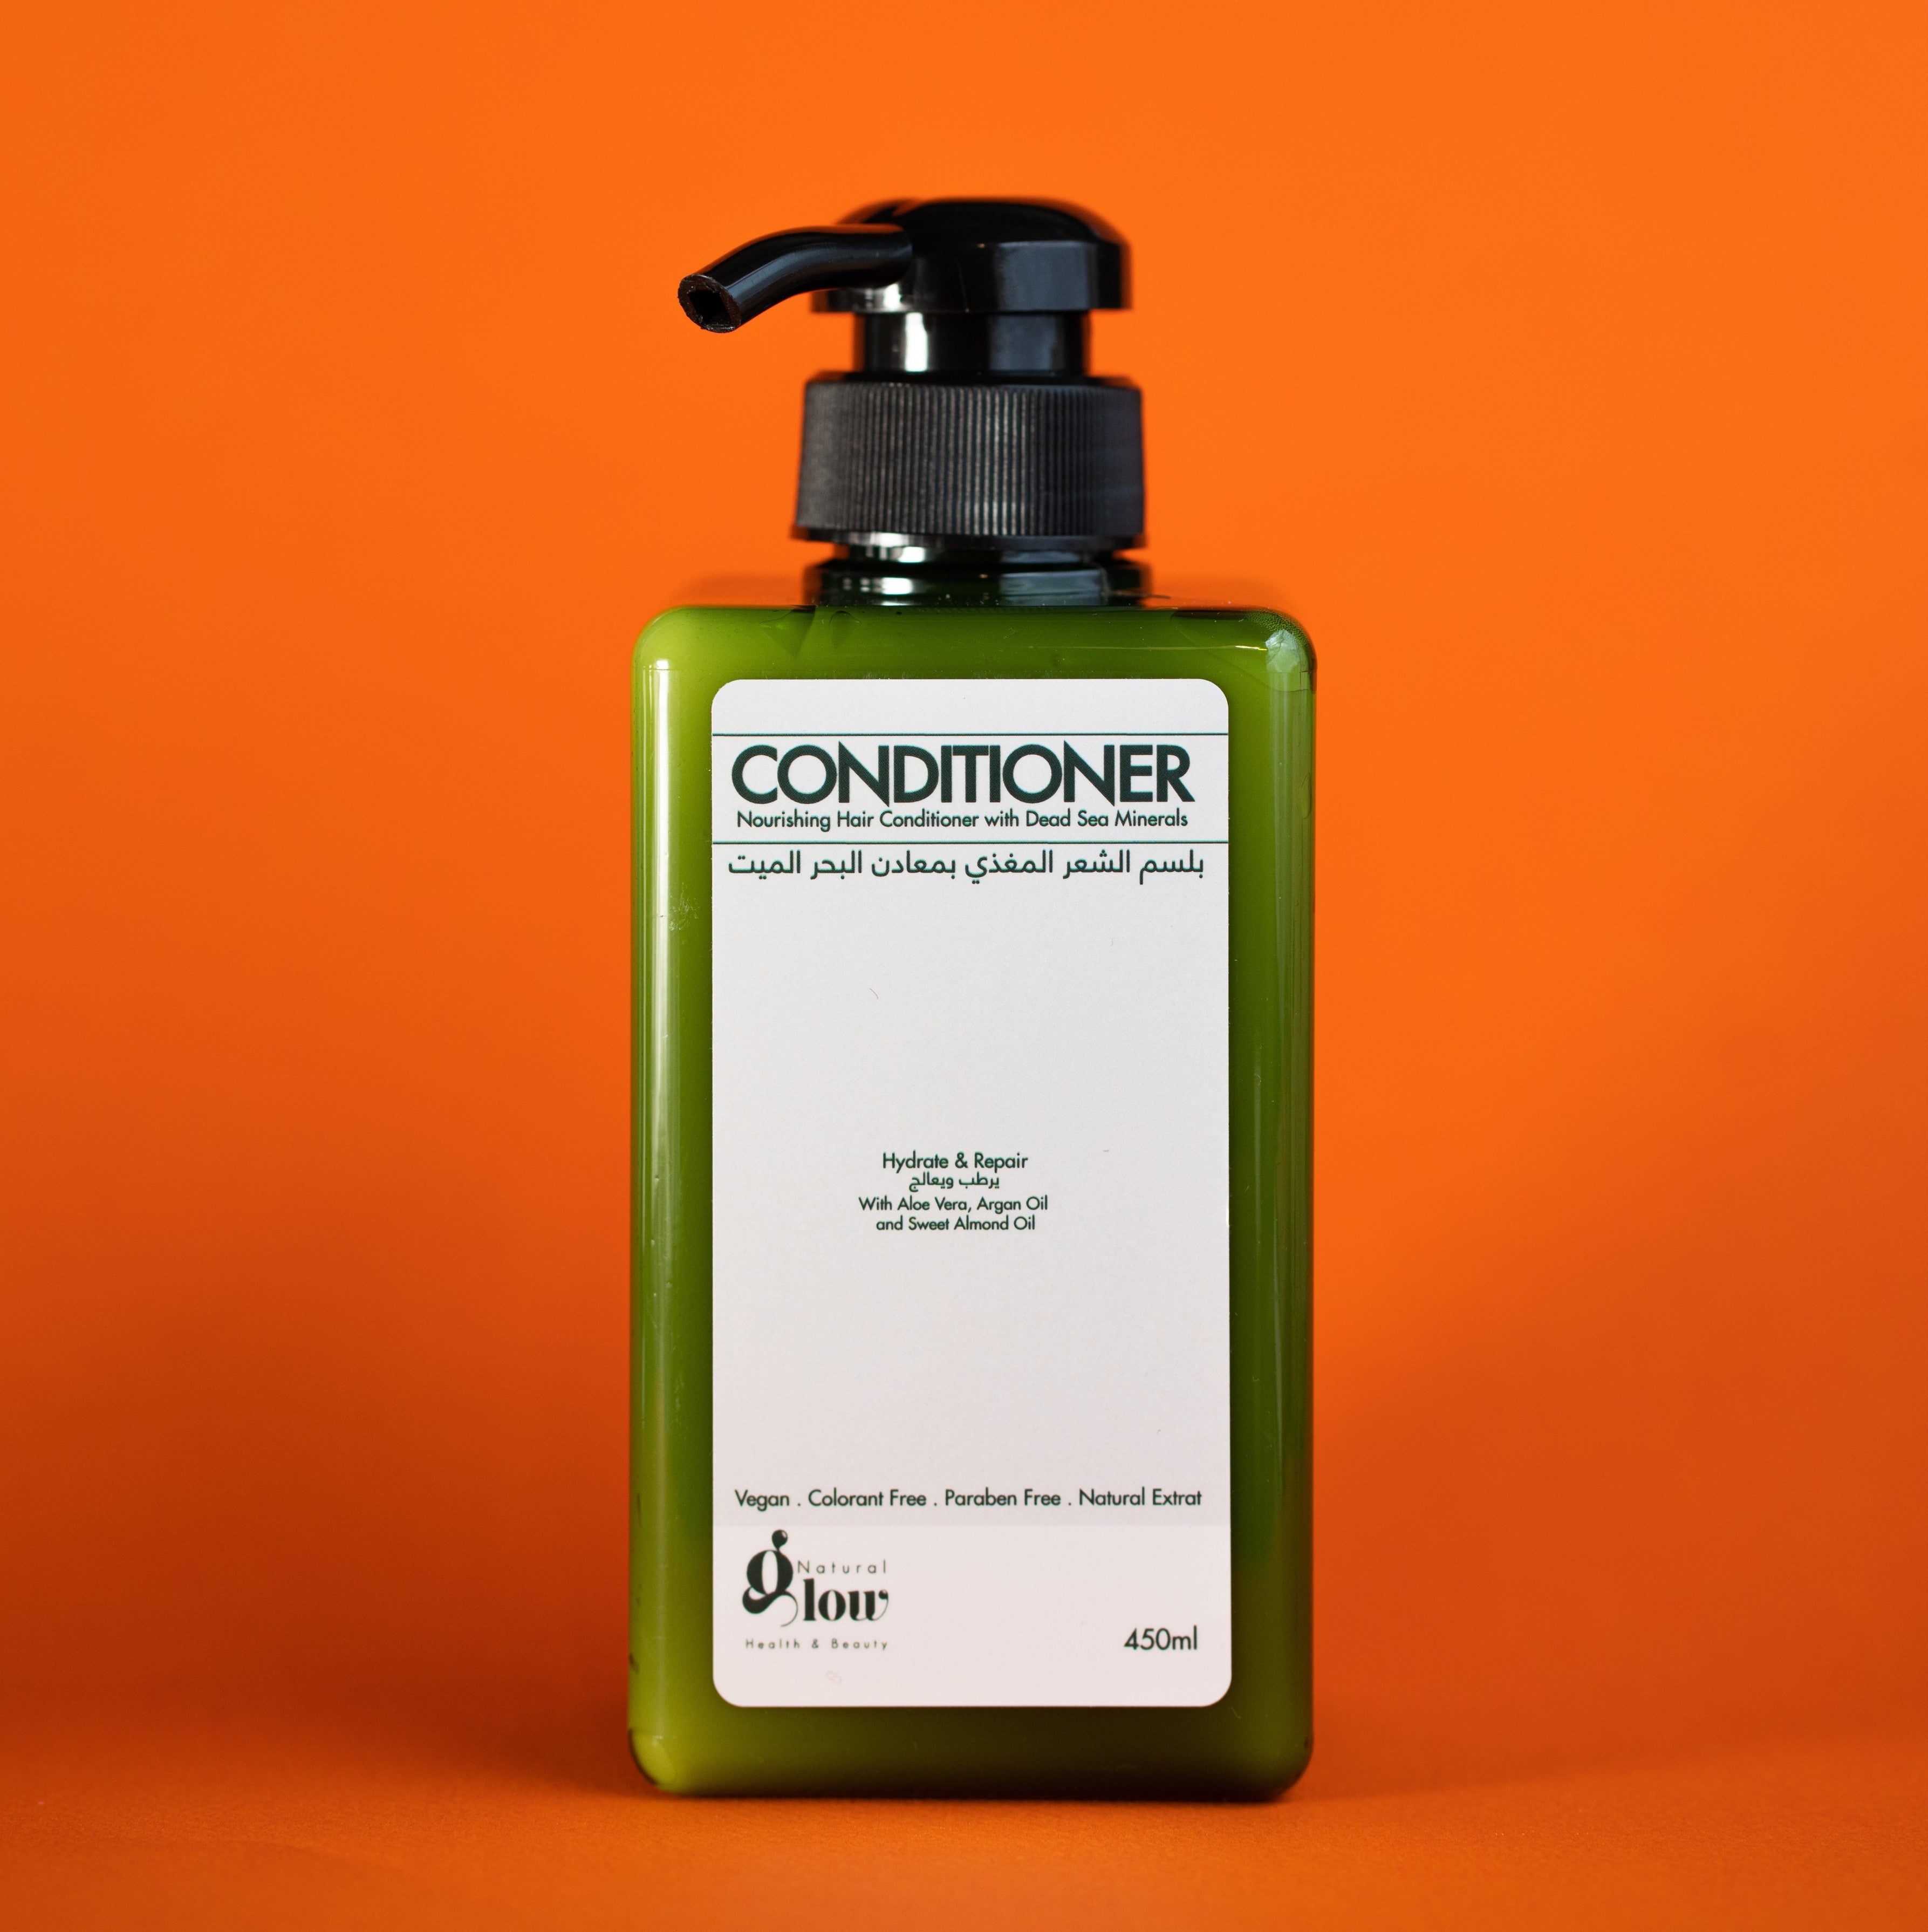 Nourishing hair conditioner with dead sea minerals